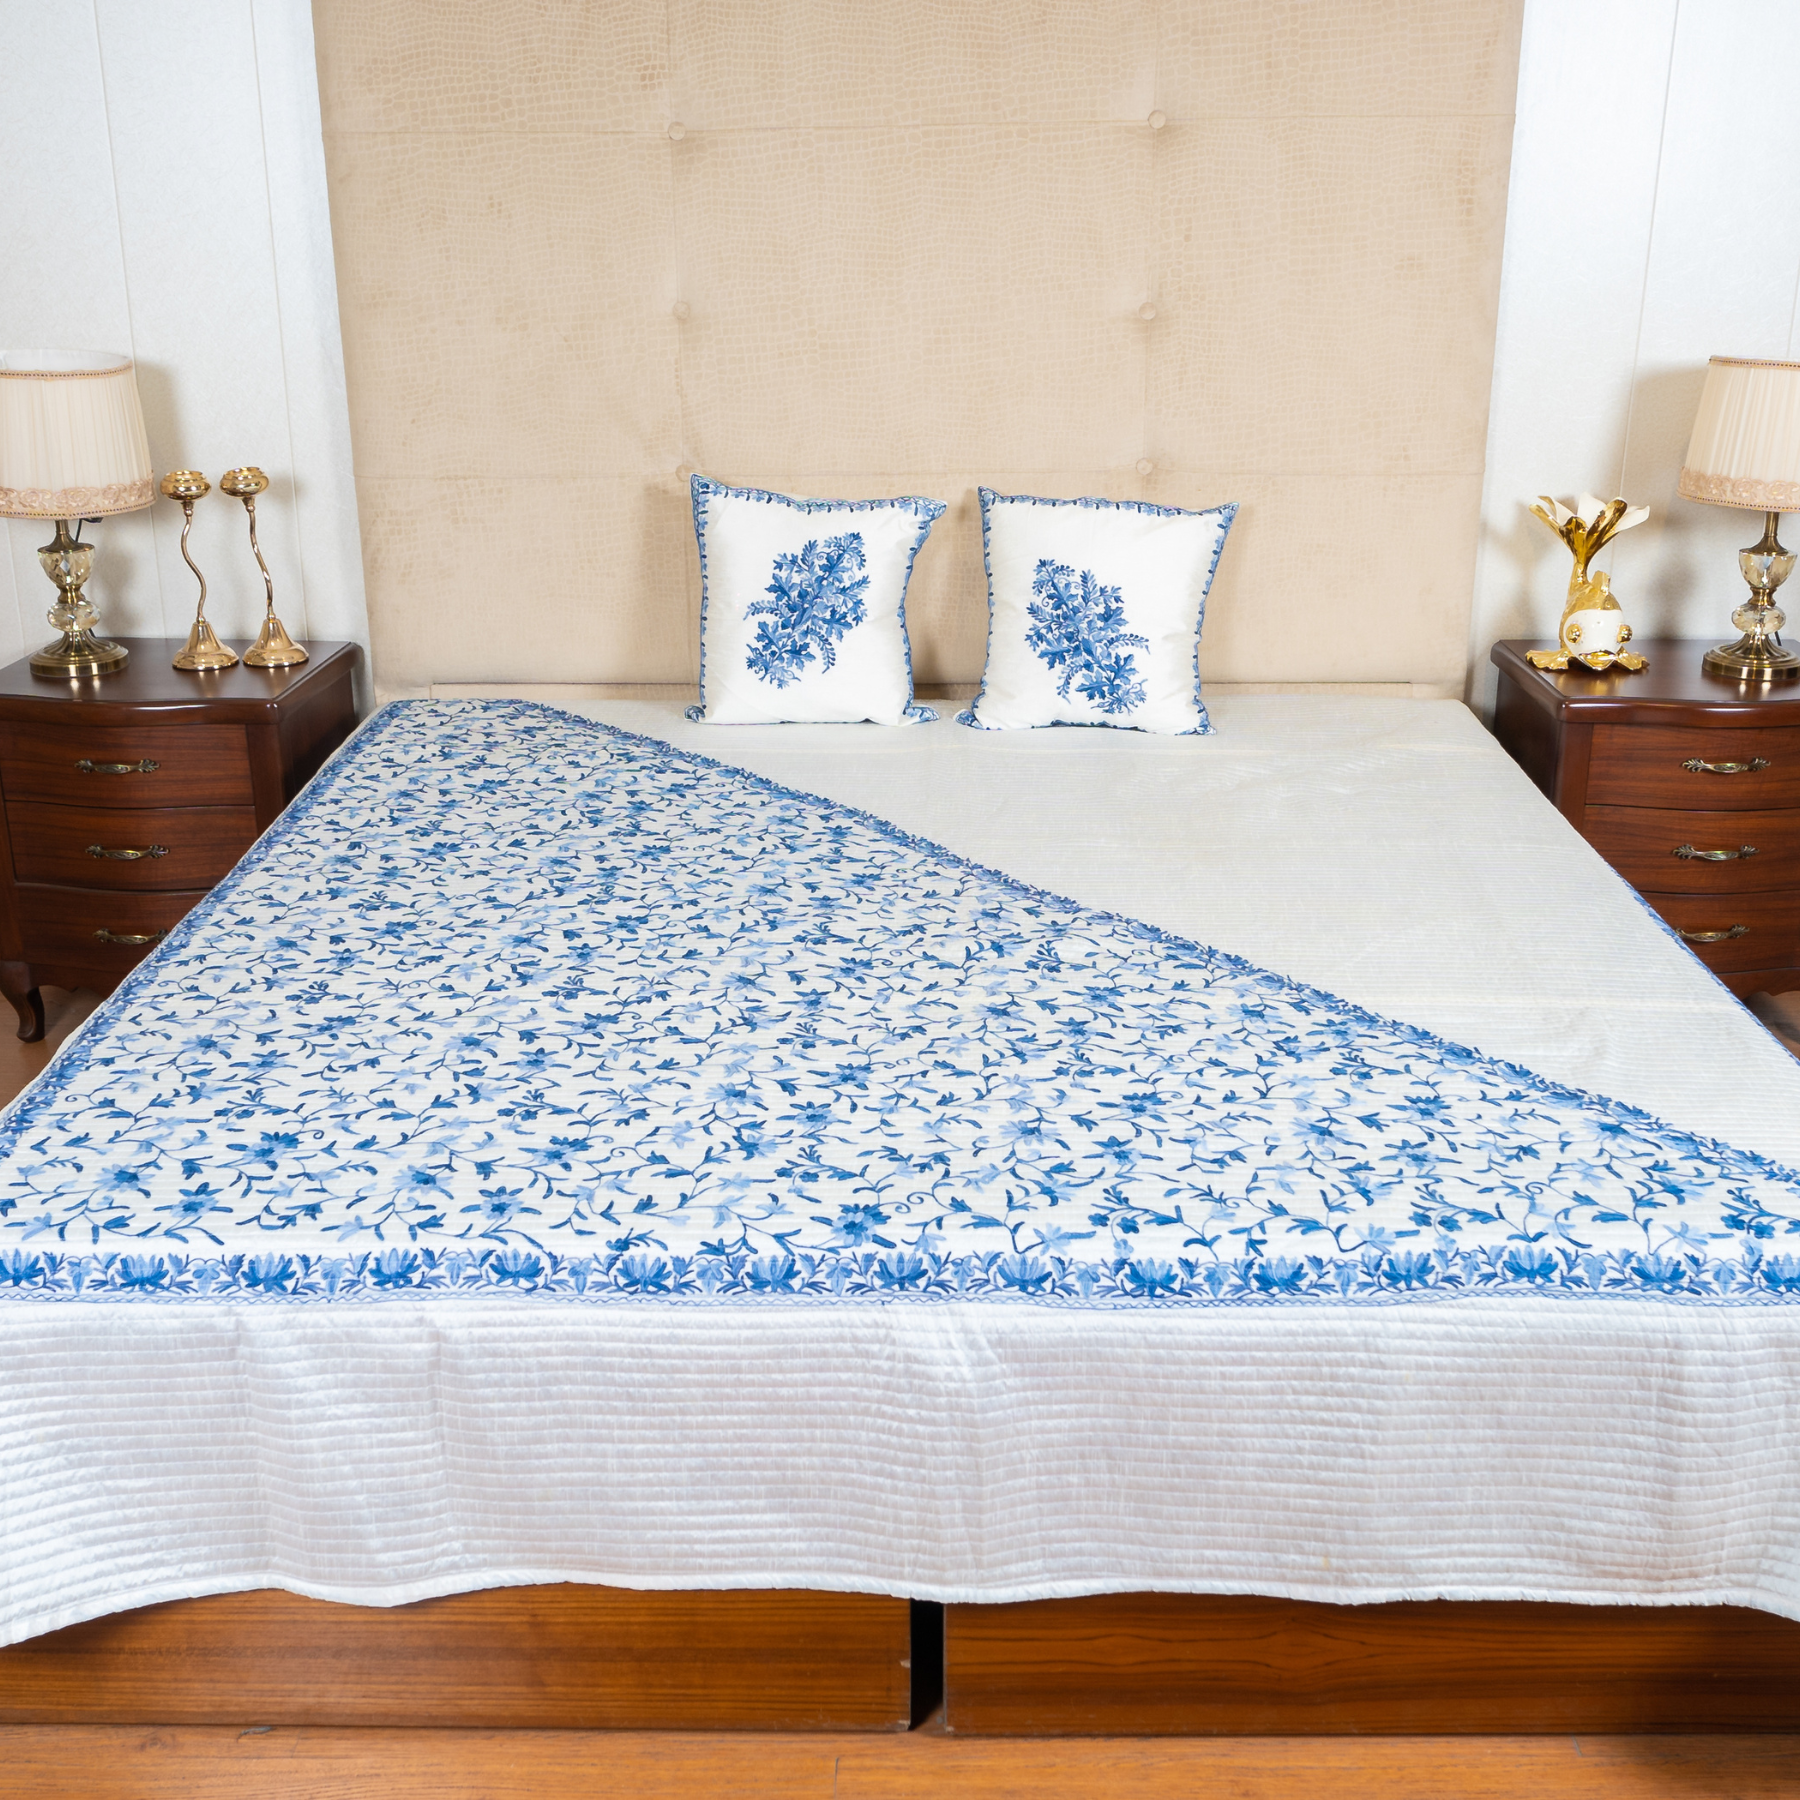 The LuxeLife Kashmiri Embroidered Bedcover